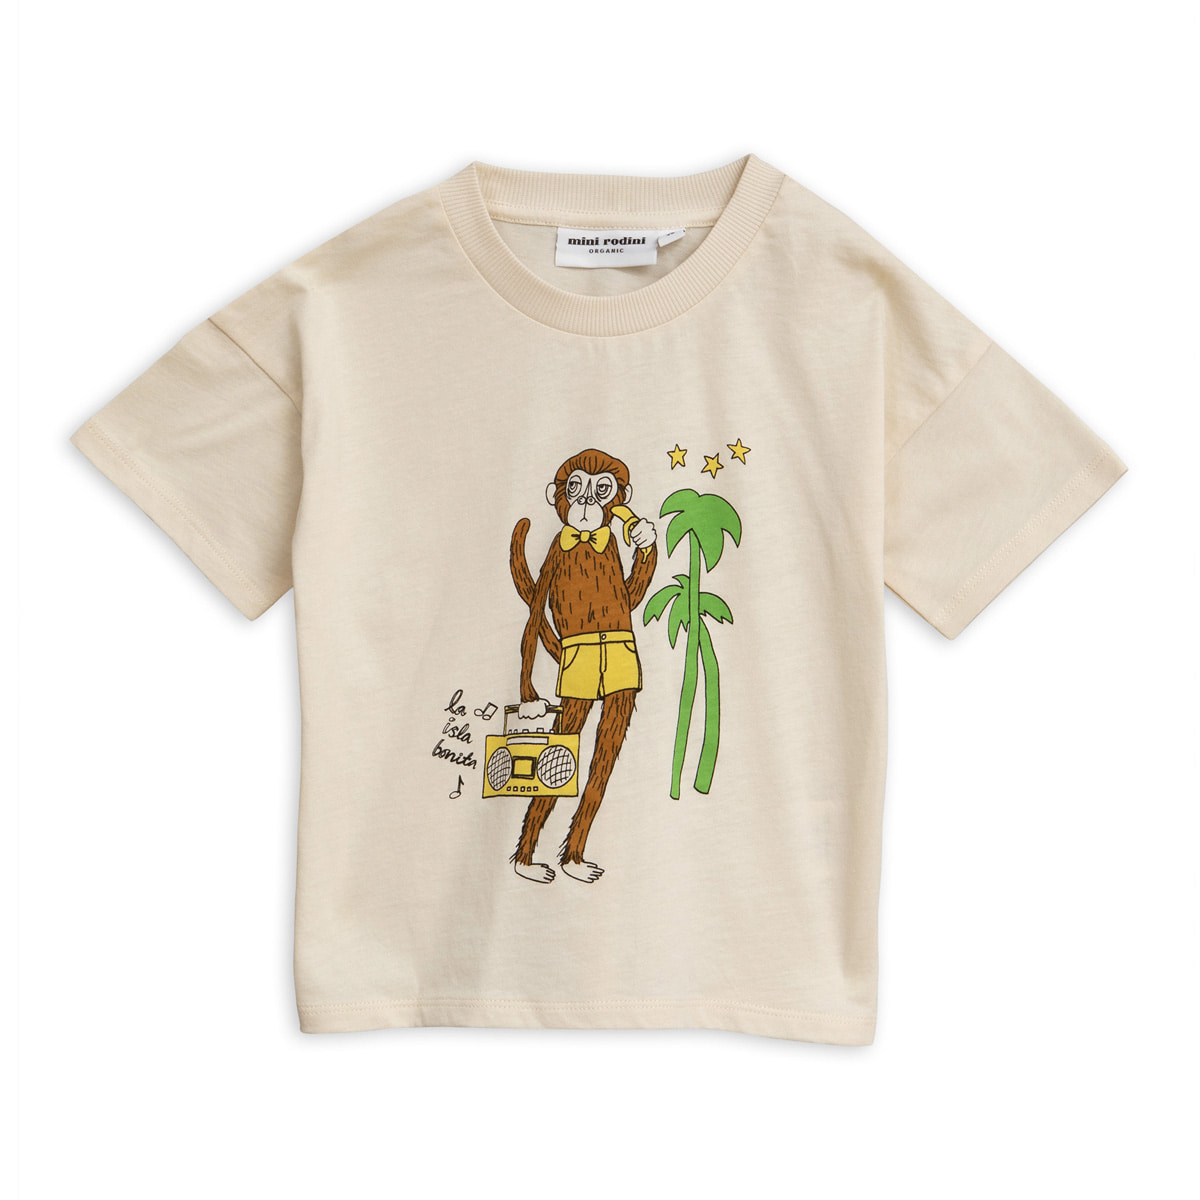 Cool monkey sp tee [Offwhite]